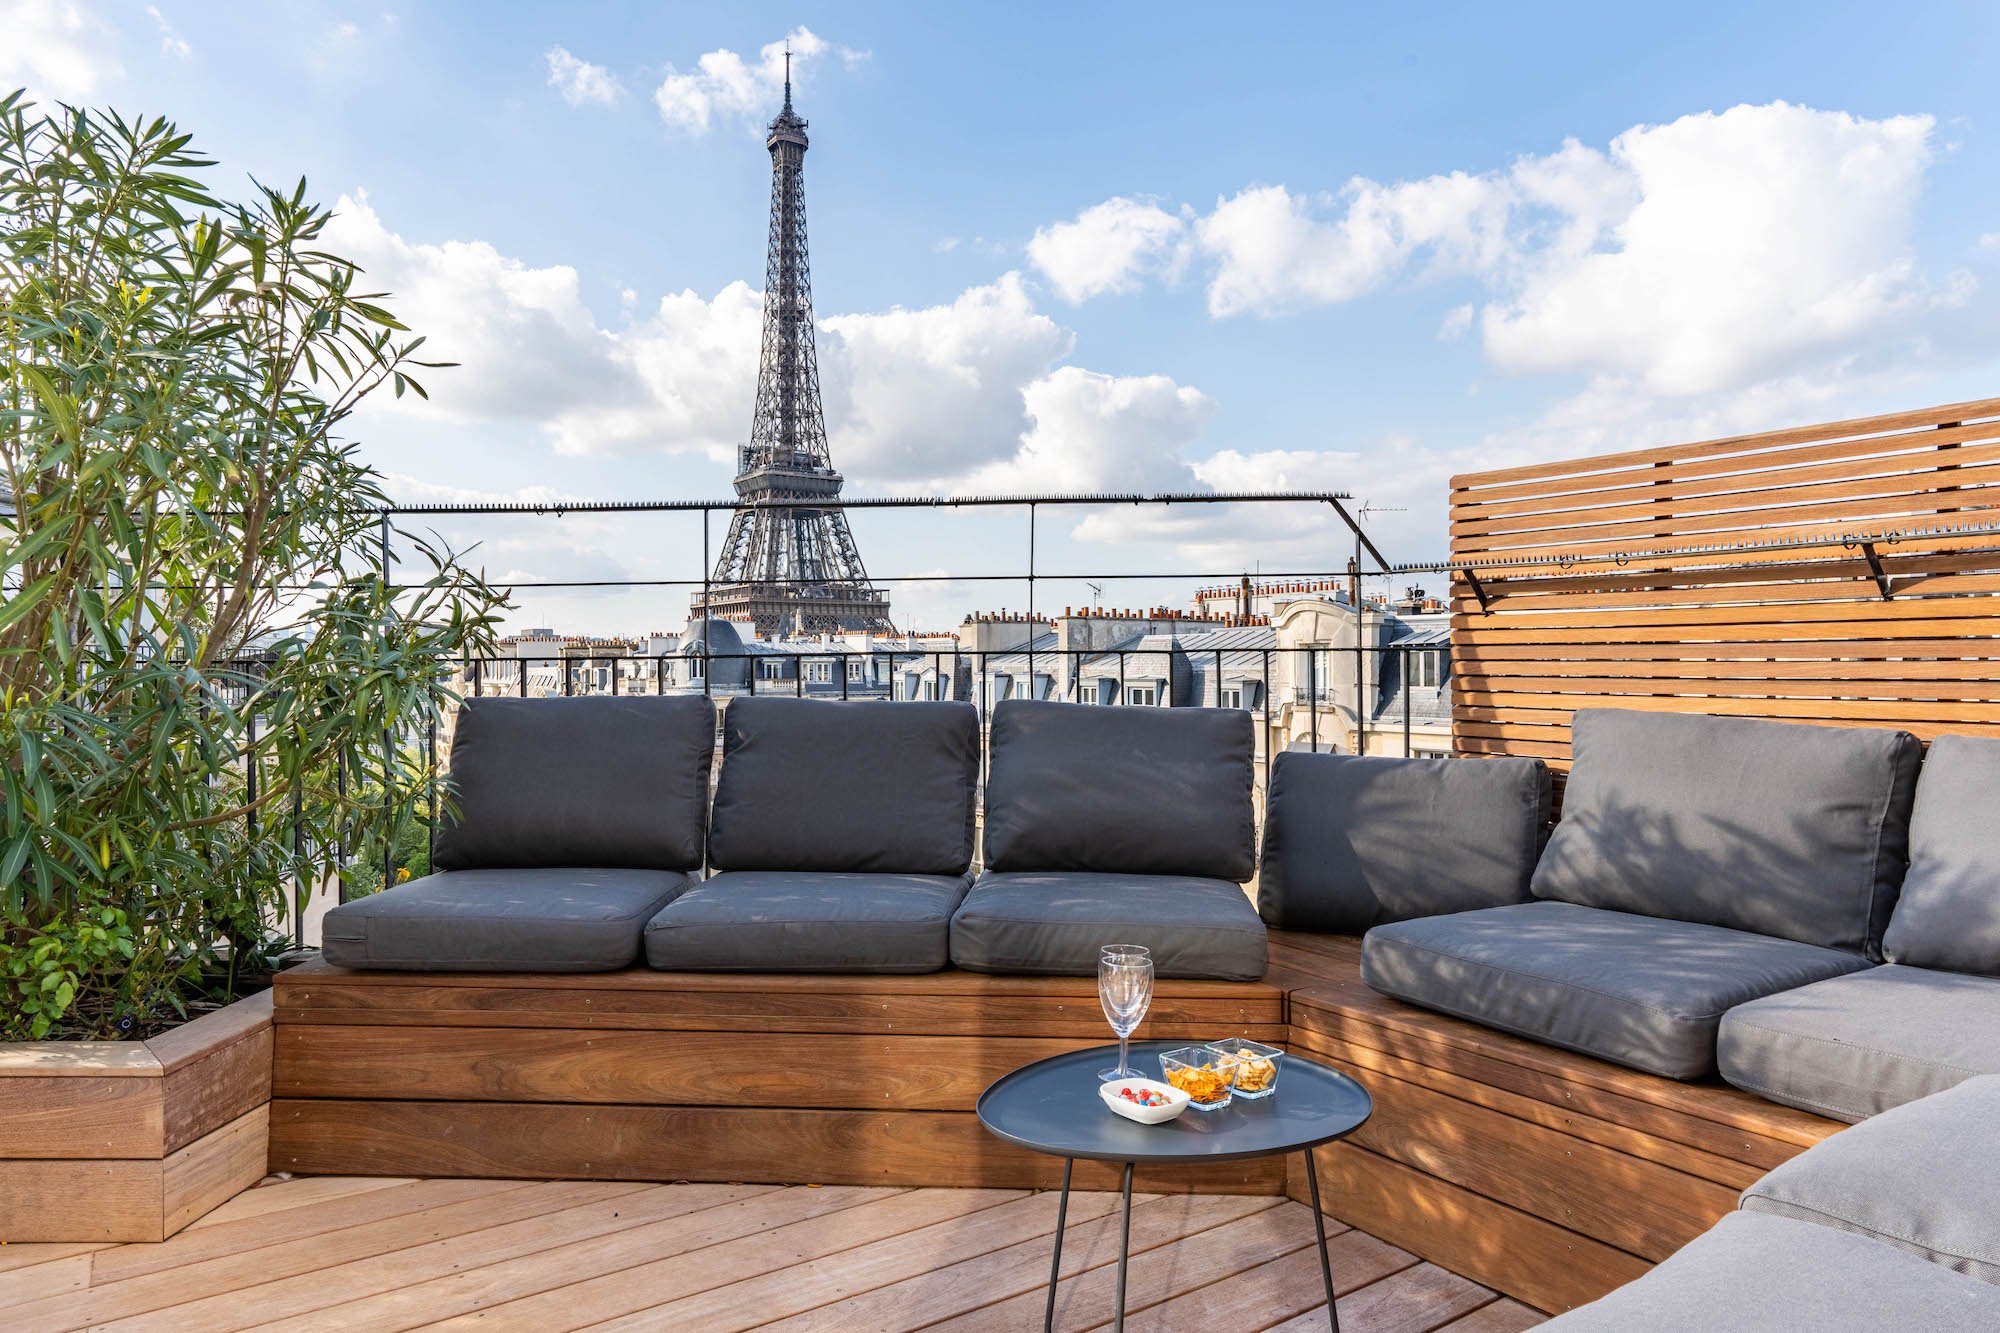 Luxury apartment and rooftop overlooking the Eiffel Tower in Paris 